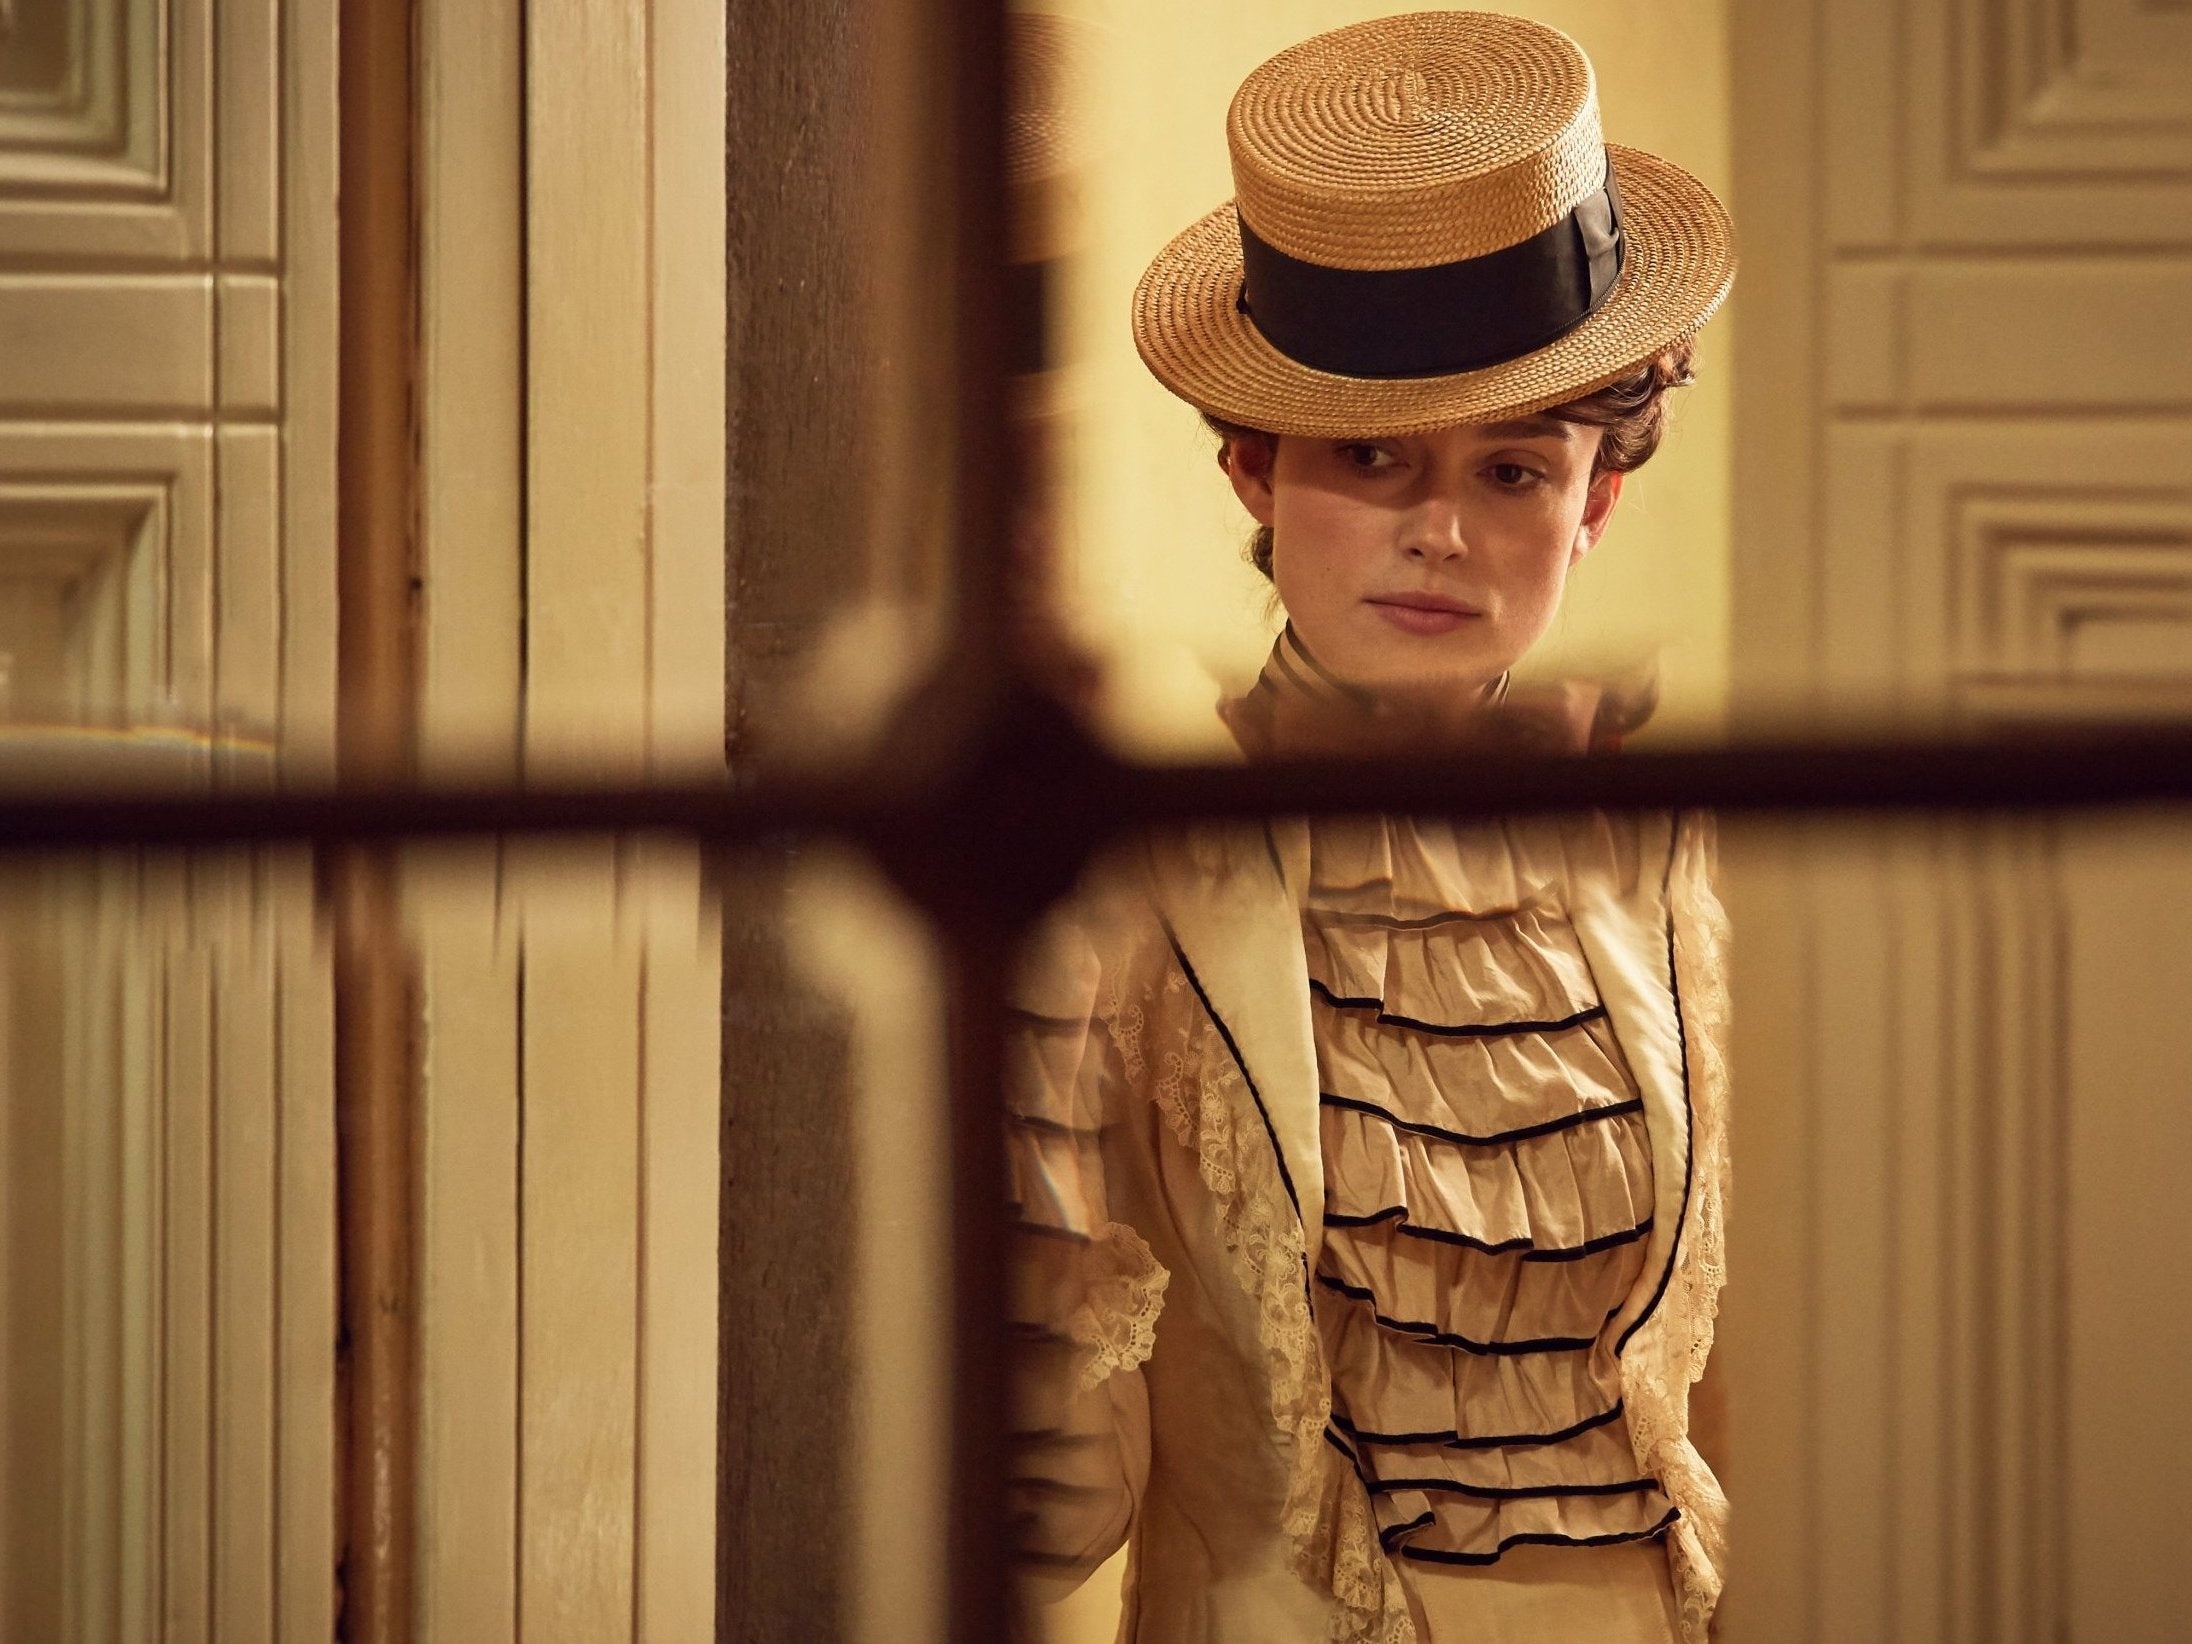 Colette, Film review, Keira Knightley's excellence, French author's biopic, 2200x1650 HD Desktop